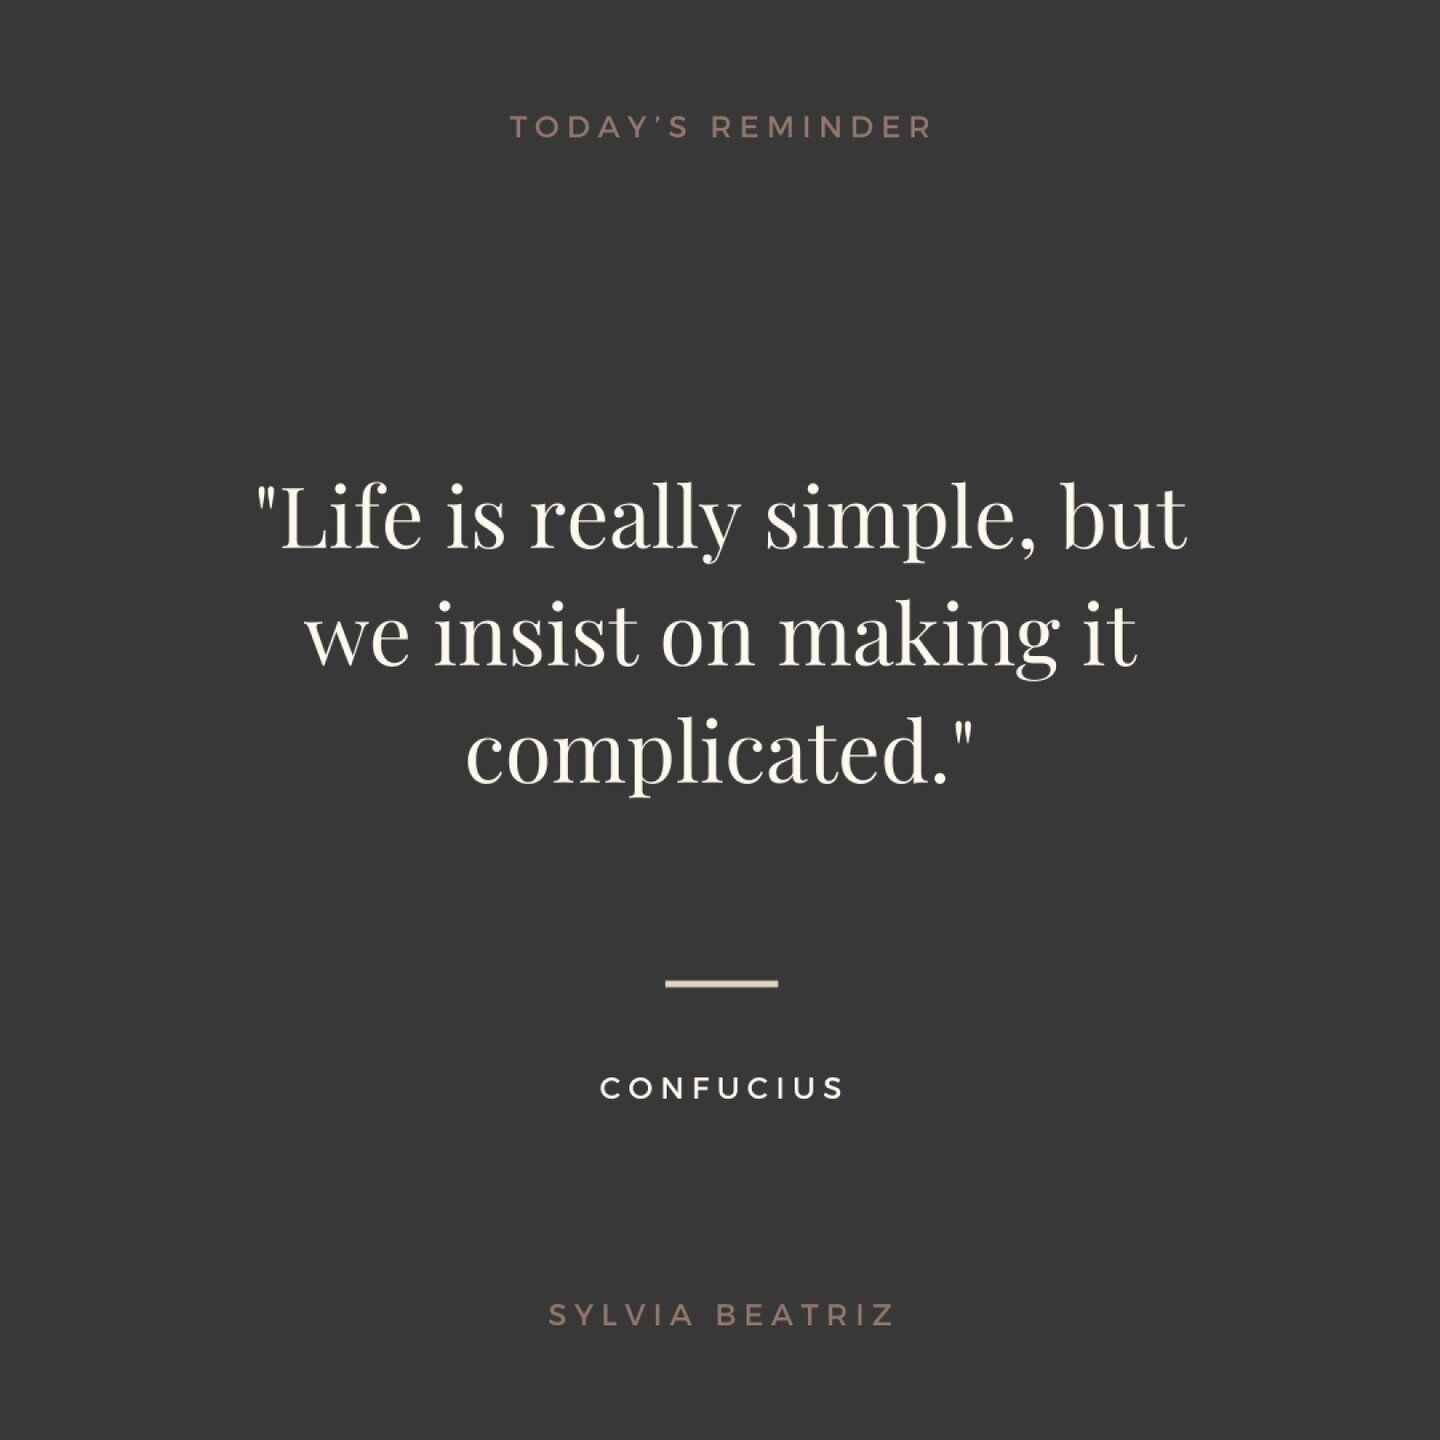 Life is really simple, but we insist on making it complicated.

I've felt this way since I was a kid. I could always feel the communication underneath the words, and I could always see how the human interactions muddied the truth underneath them, and